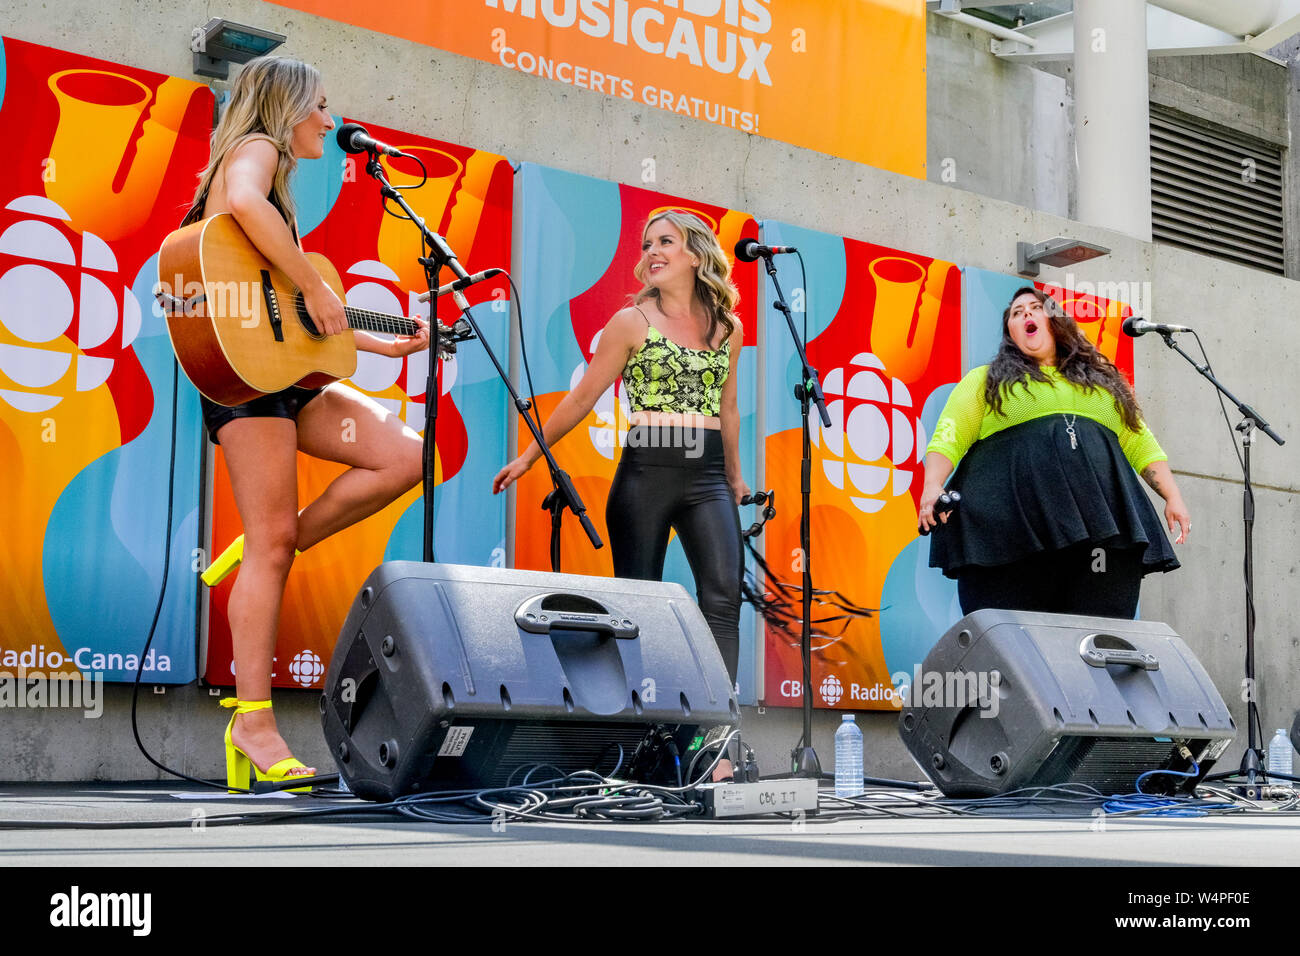 Country Music Group, The Heels play at CBC Musical Nooners, Vancouver, British Columbia, Canada Stock Photo